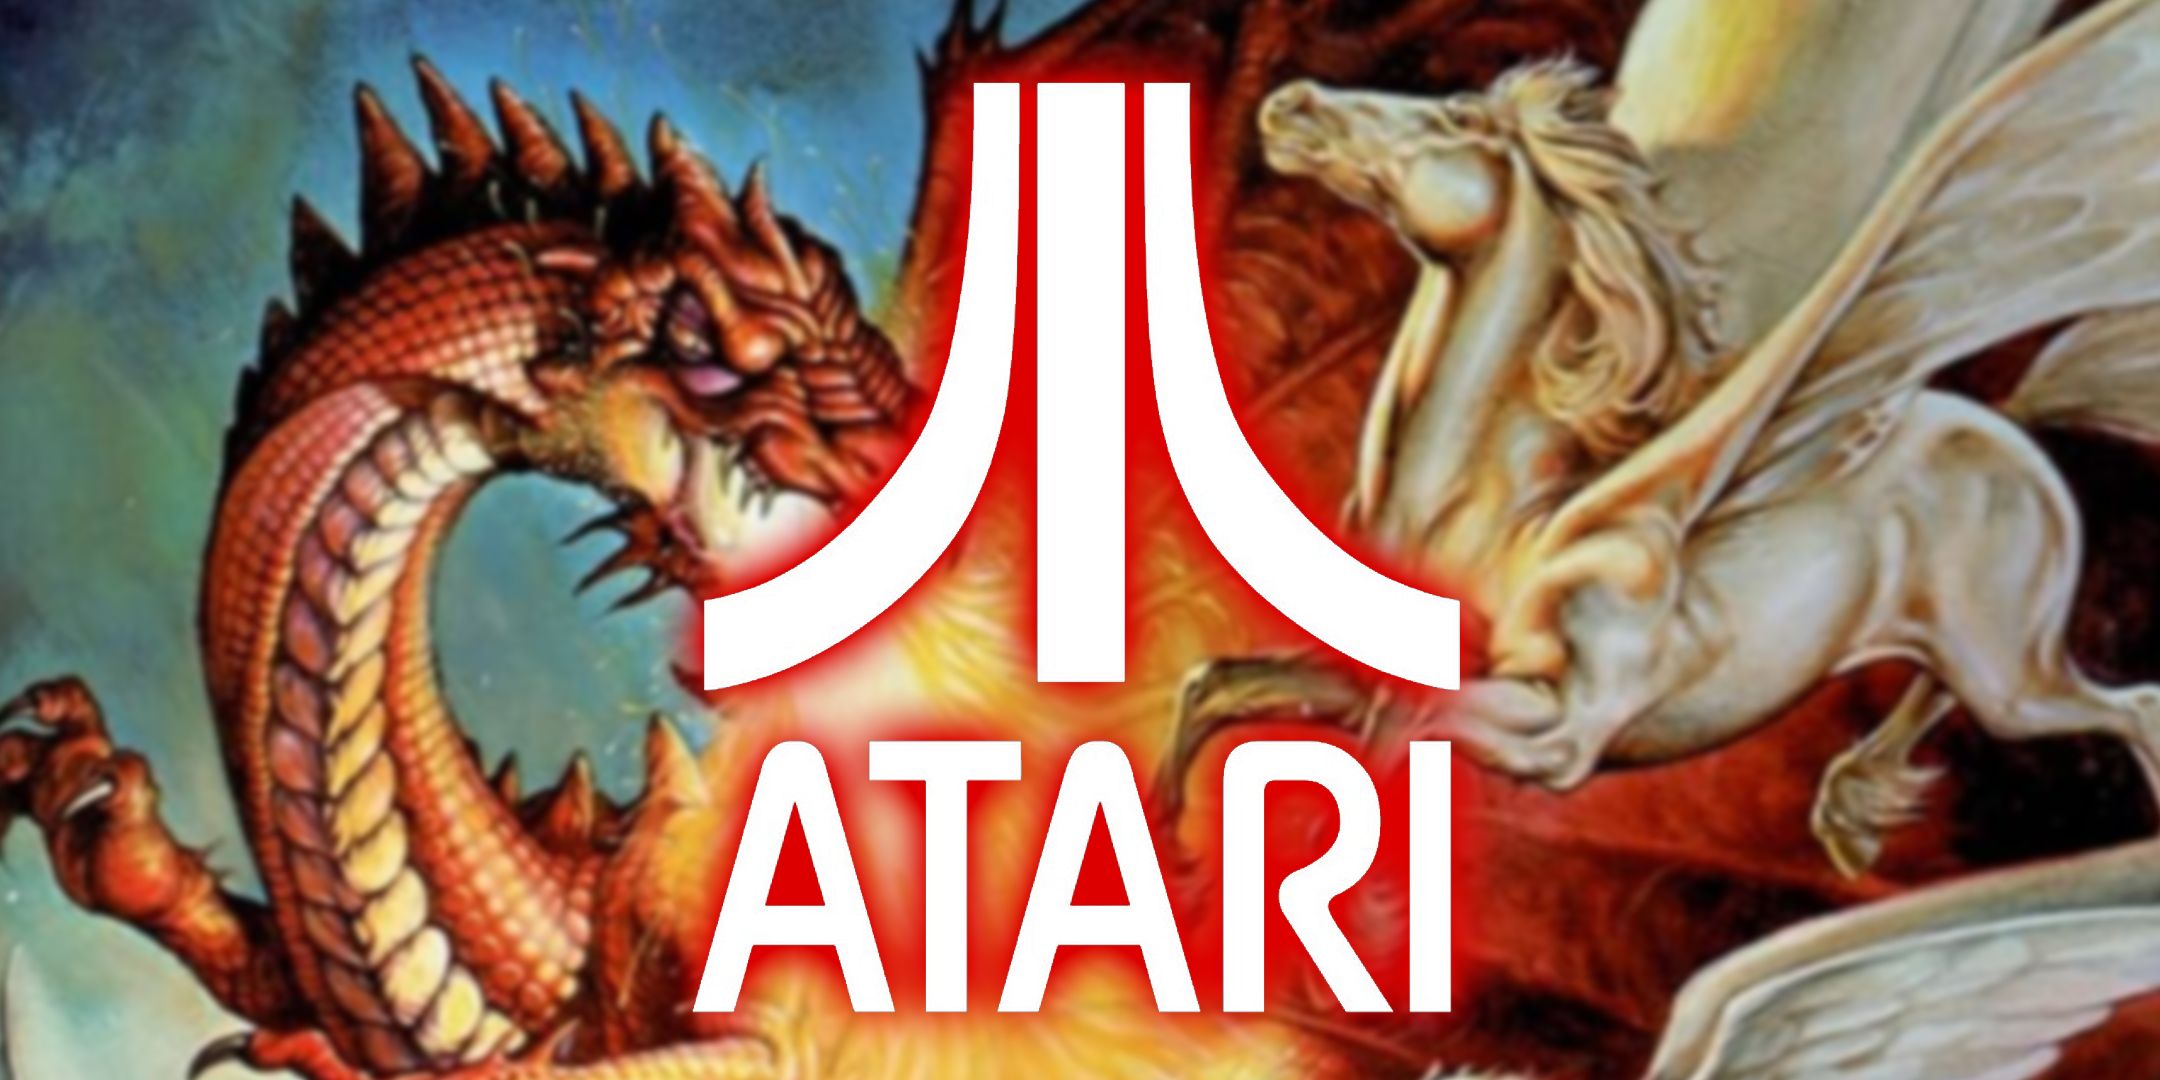 The Atari Logo in front of art from the Advanced D&D Monster Manual.